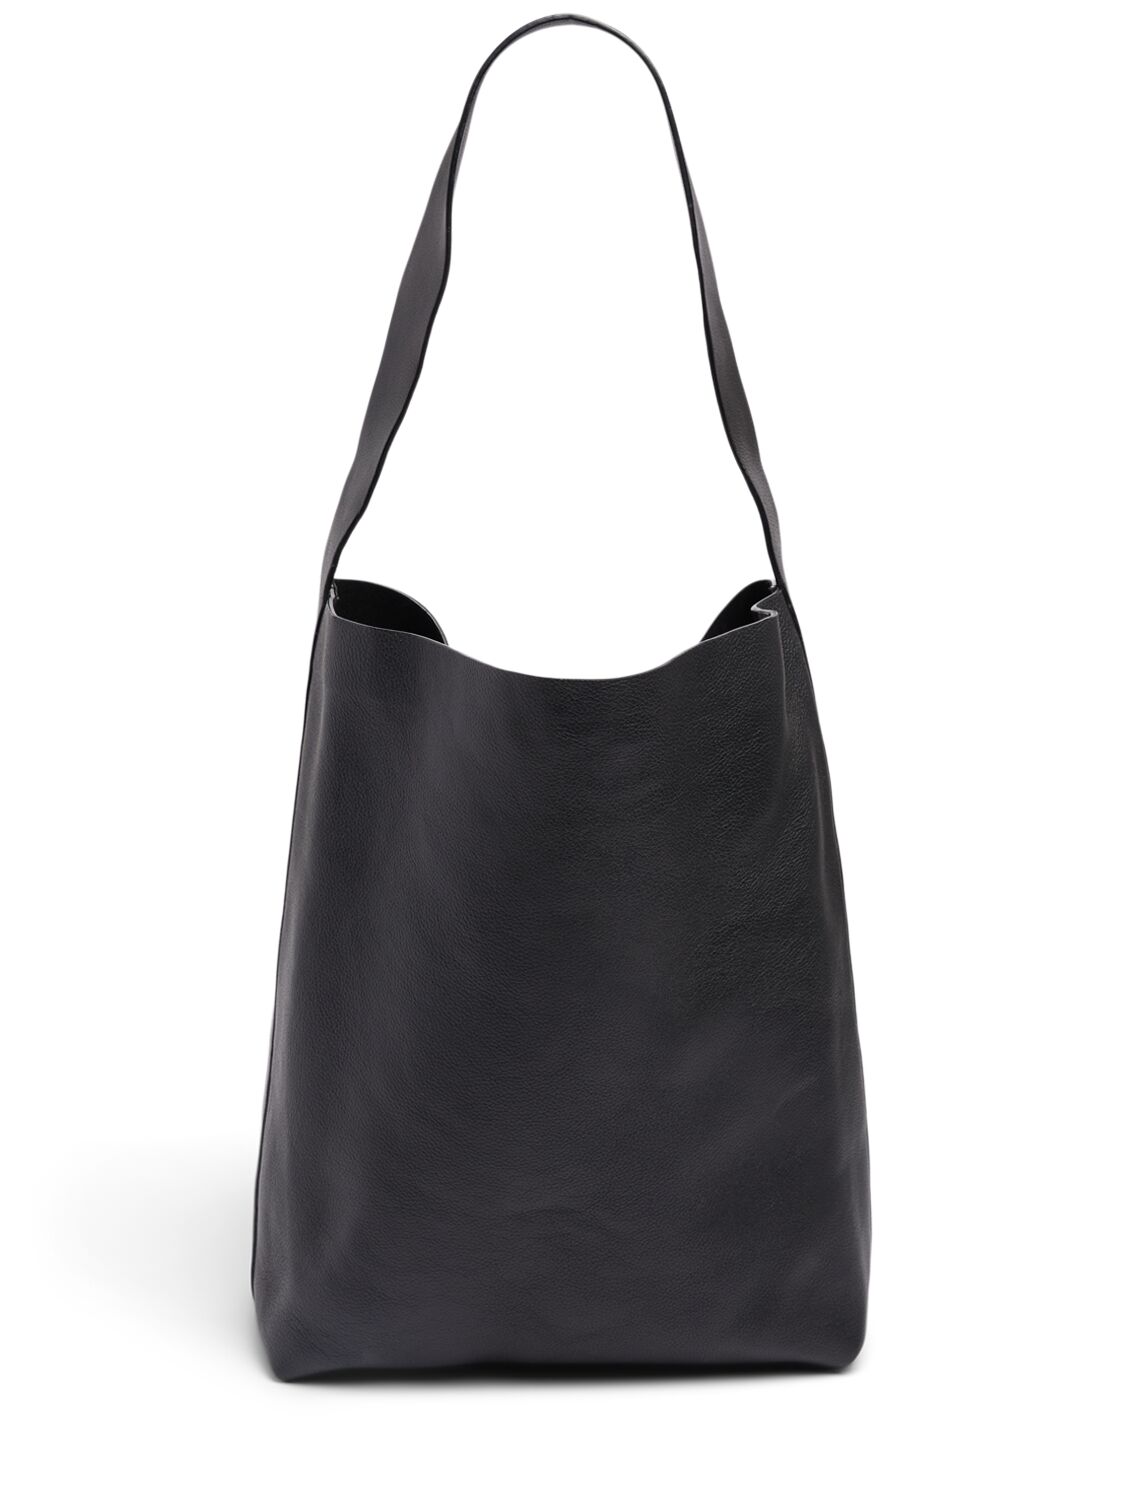 Image of Minimal Everyday Leather Tote Bag